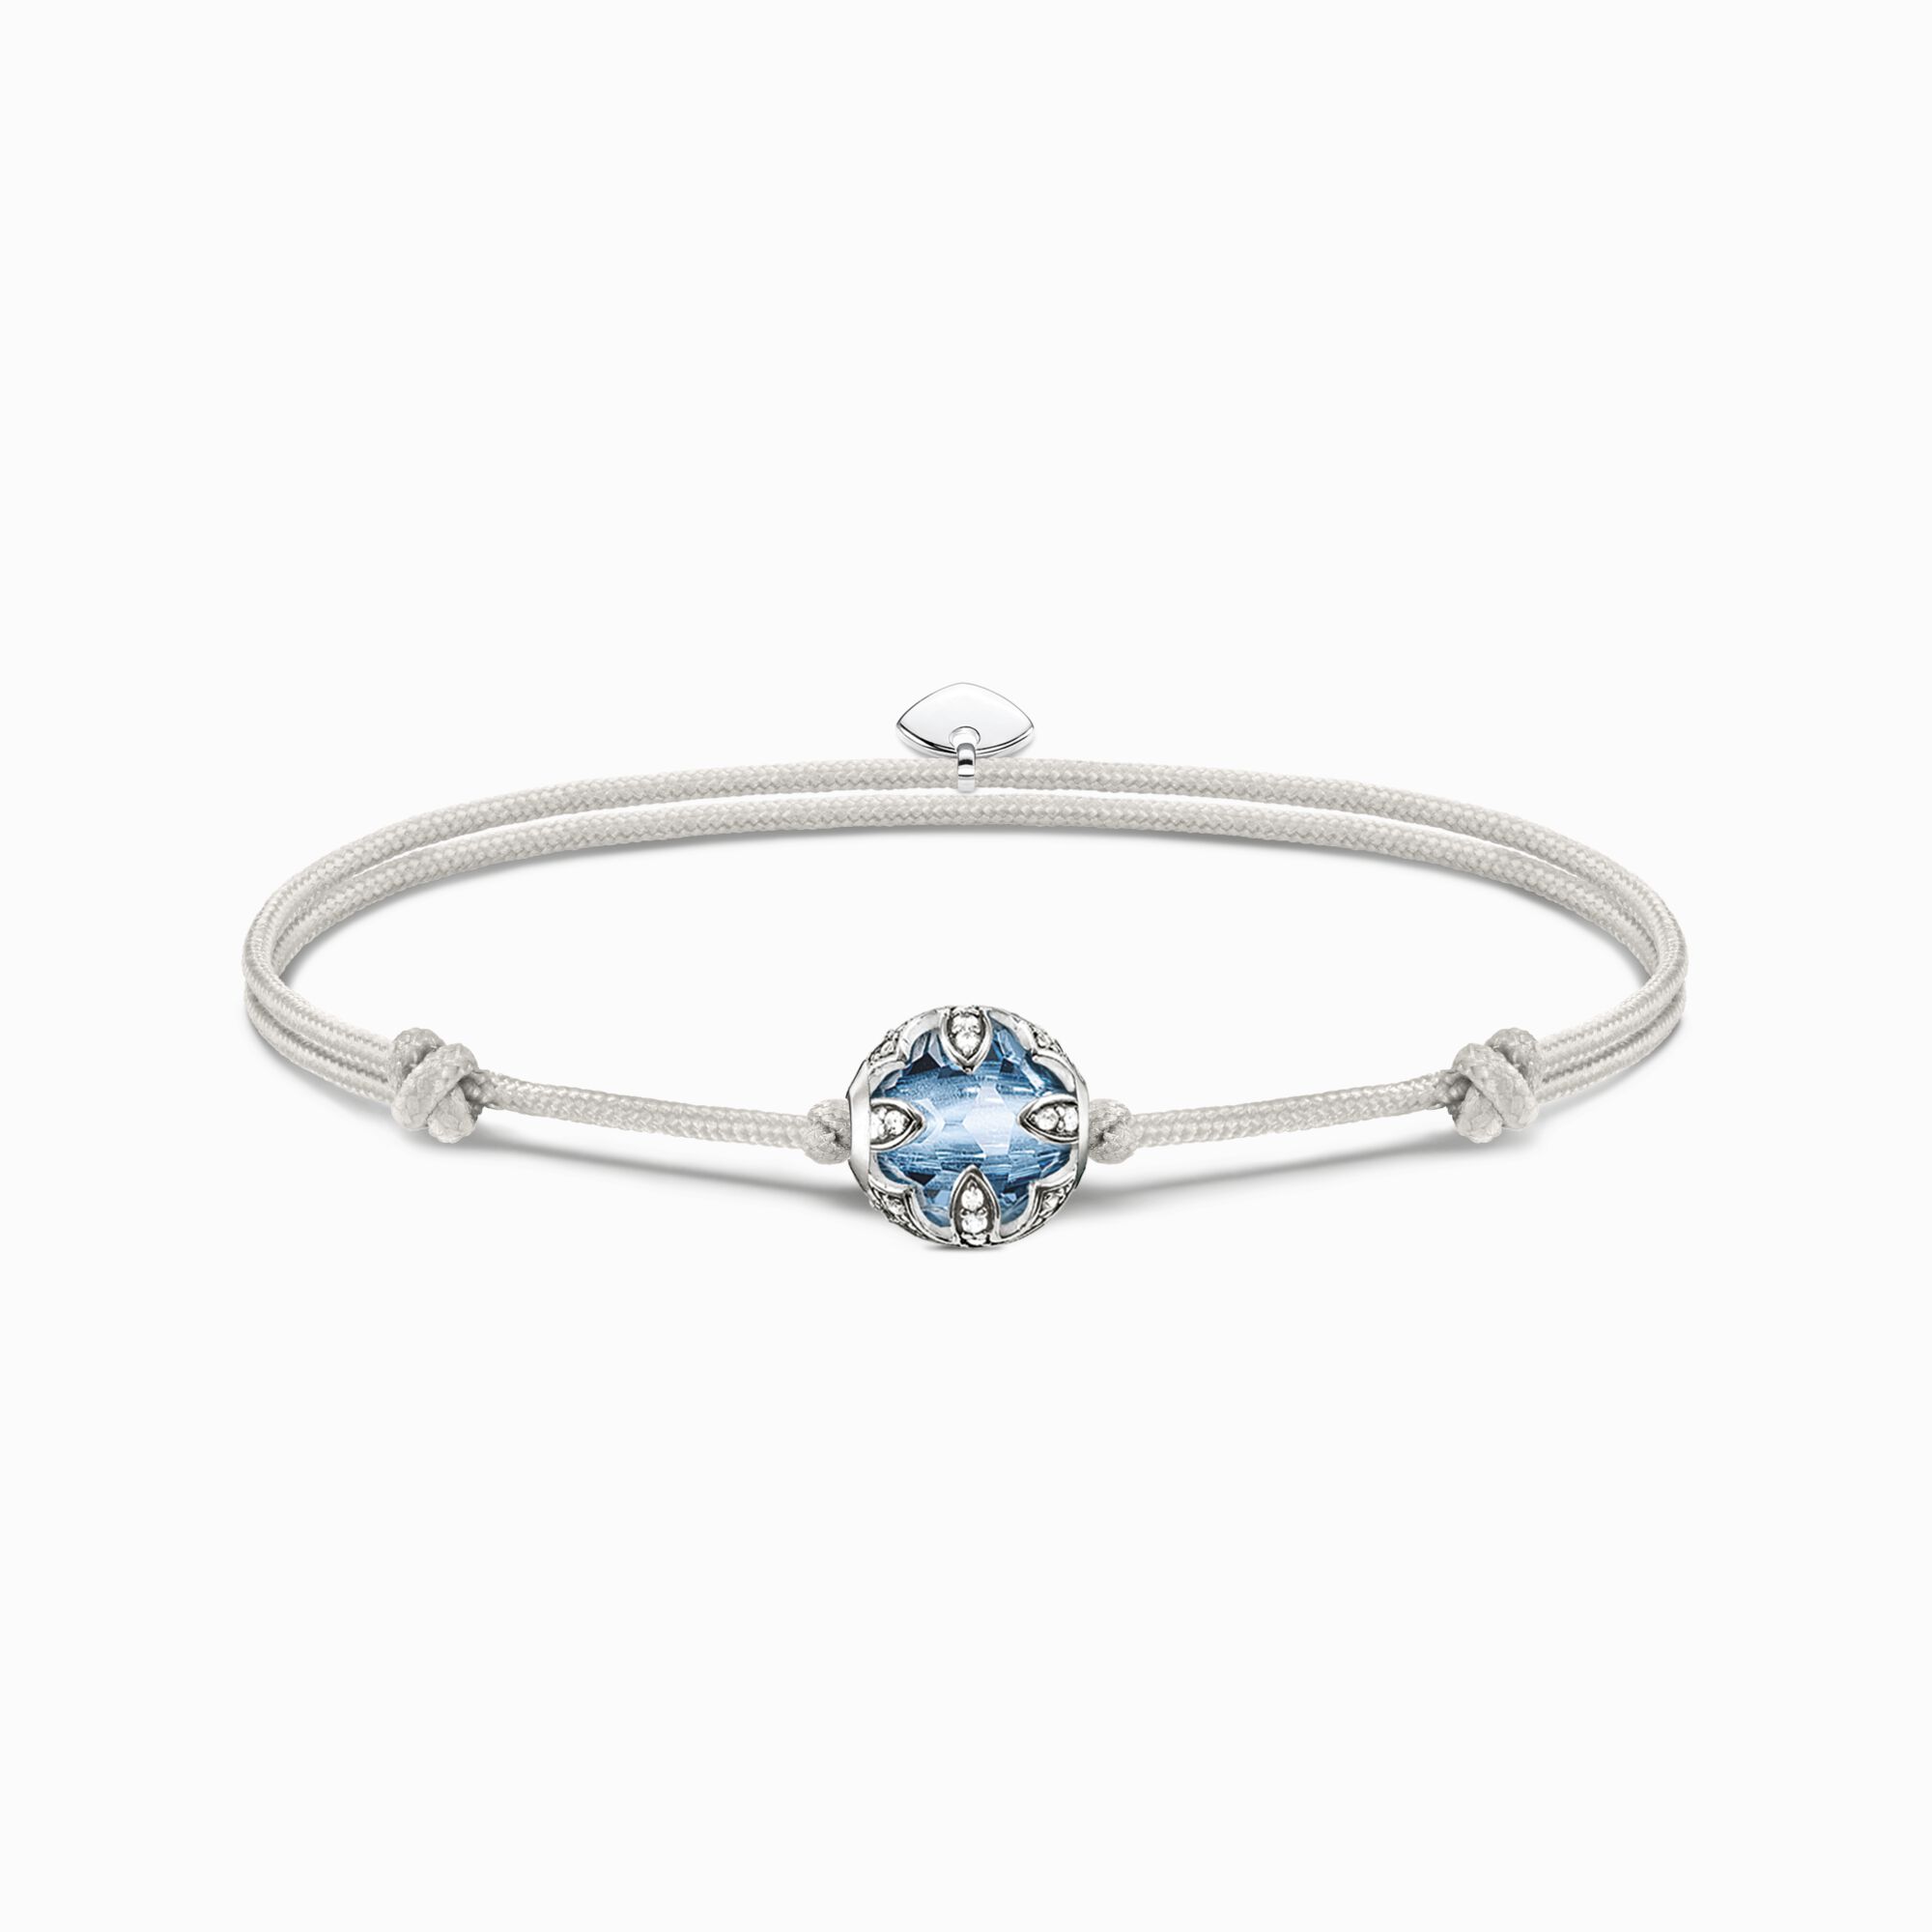 Bracelet Karma Secret with synthetic spinel blue Bead from the Karma Beads collection in the THOMAS SABO online store